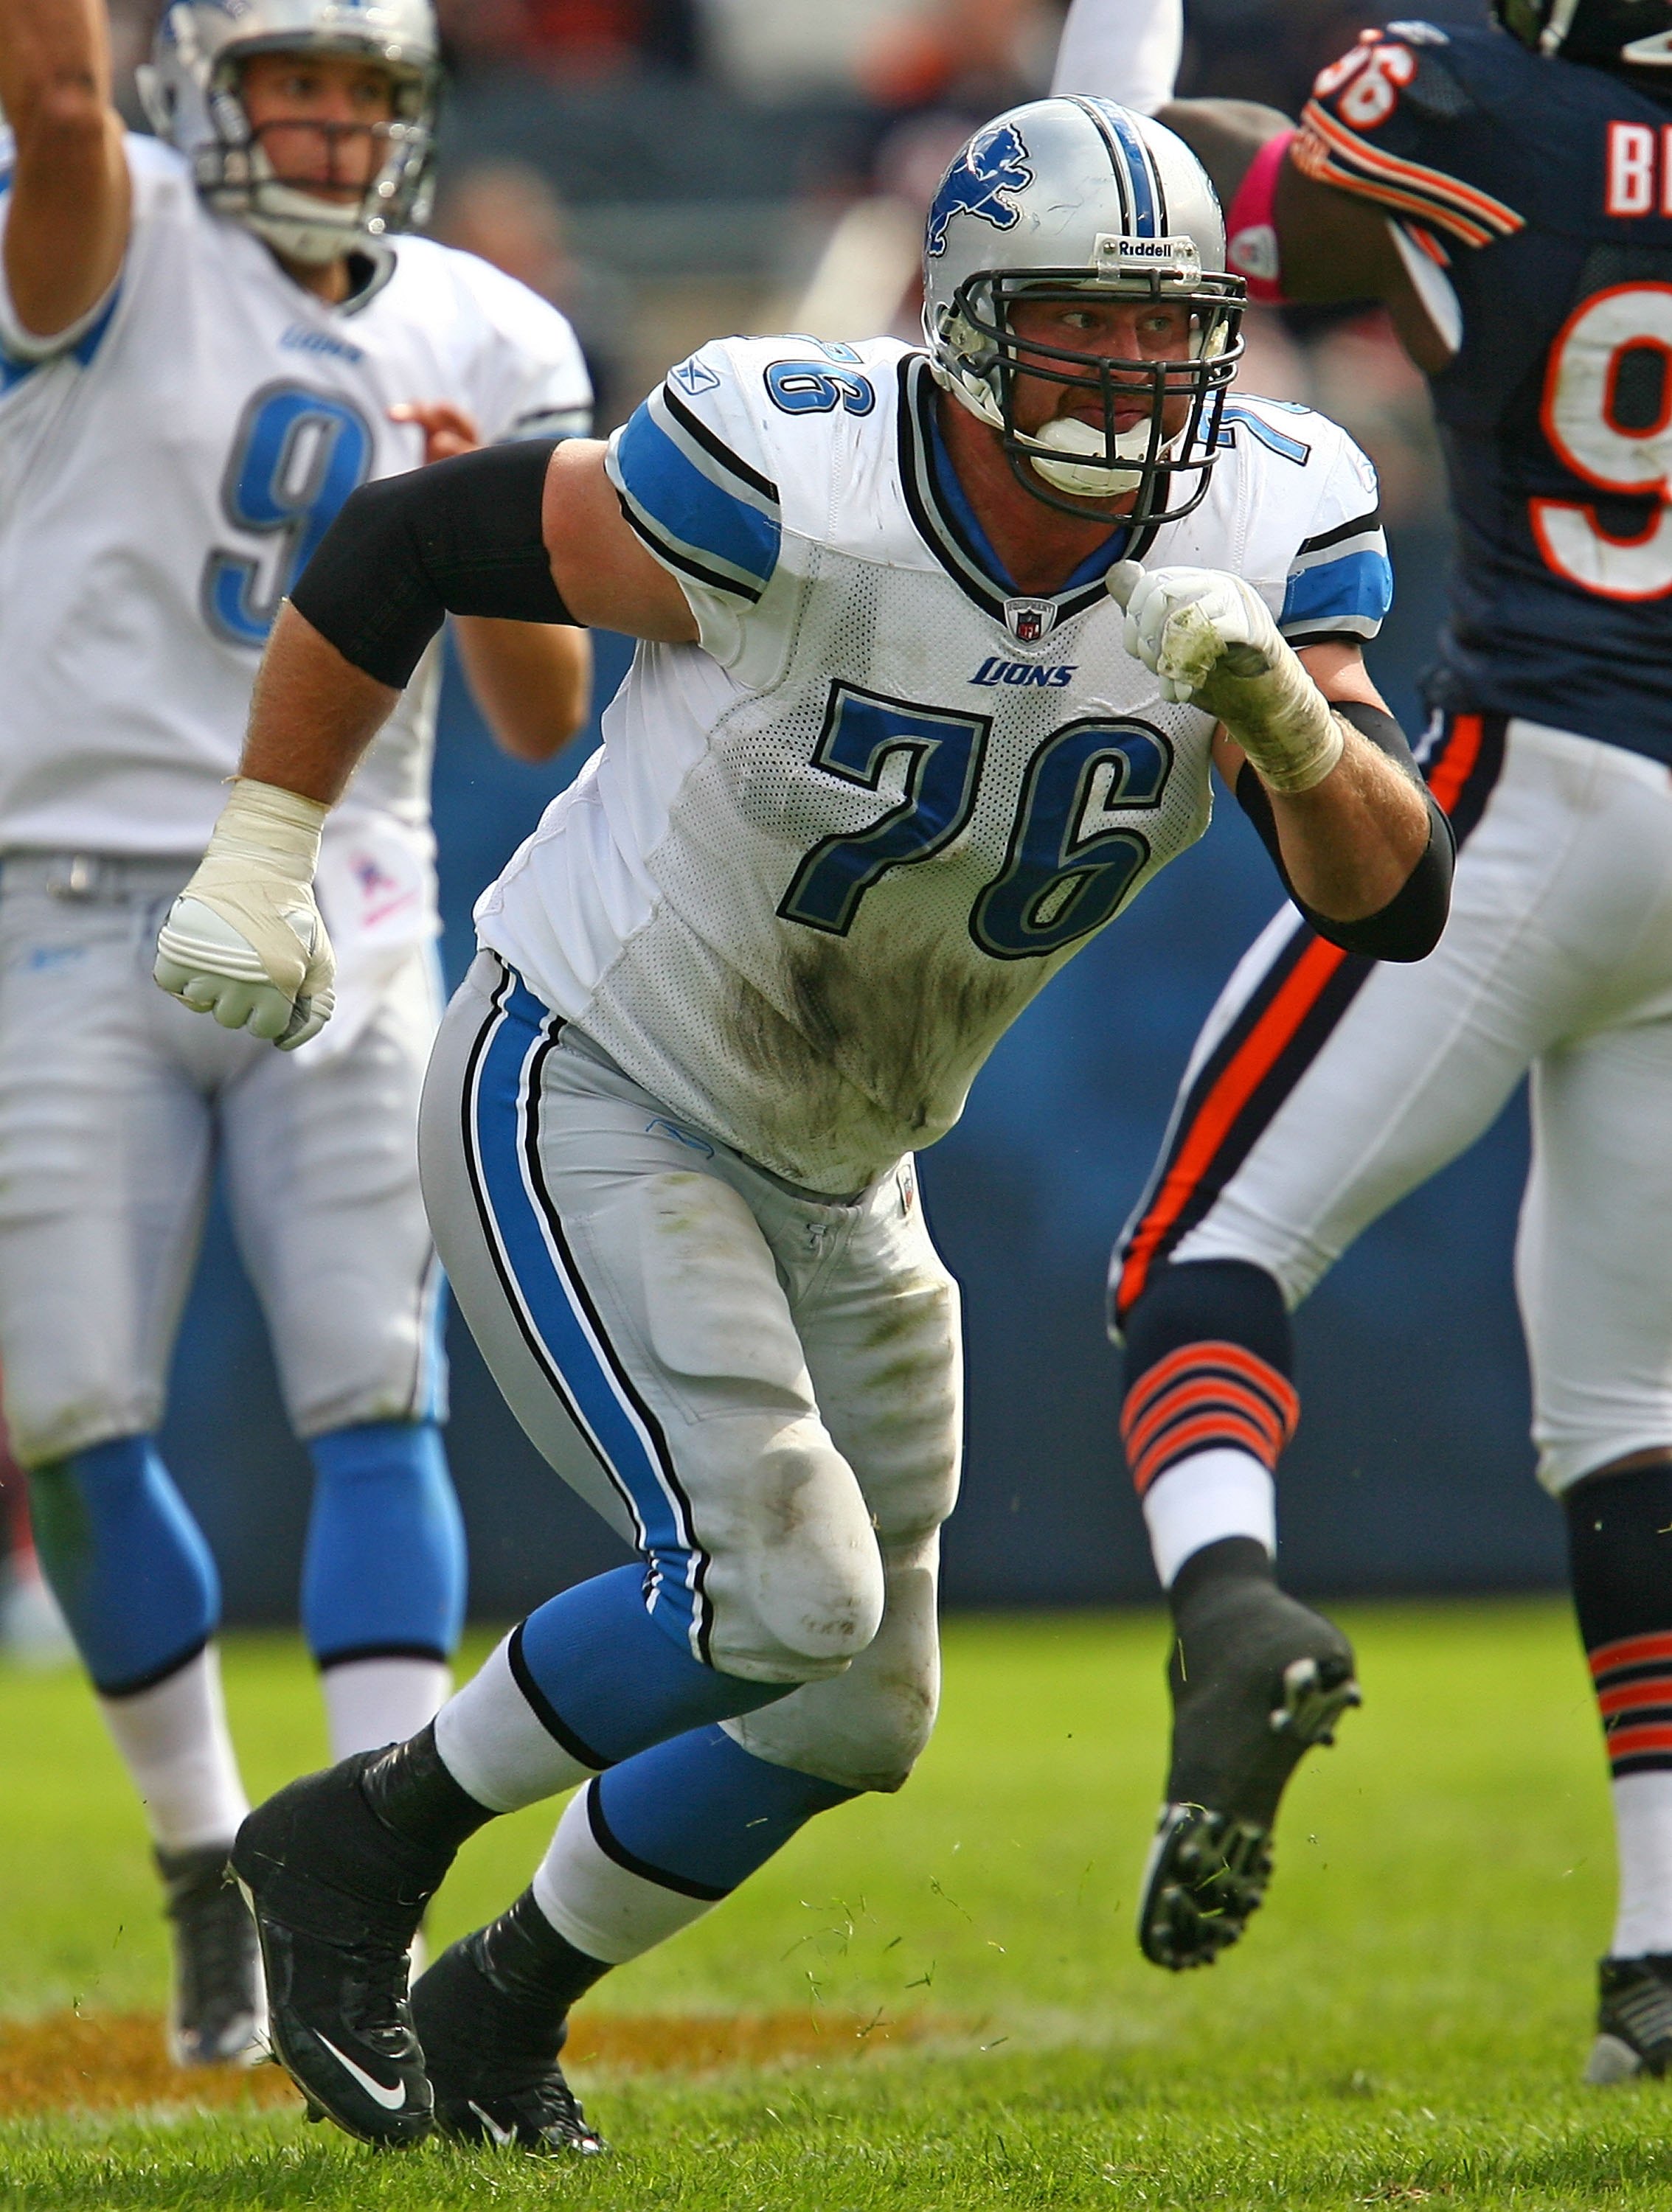 CHICAGO - OCTOBER 04: Jeff Backus #76 of the Detroit Lions moves to block against the Chicago Bears on October 4, 2009 at Soldier Field in Chicago, Illinois. The Bears defeated the Lions 48-24. (Photo by Jonathan Daniel/Getty Images)